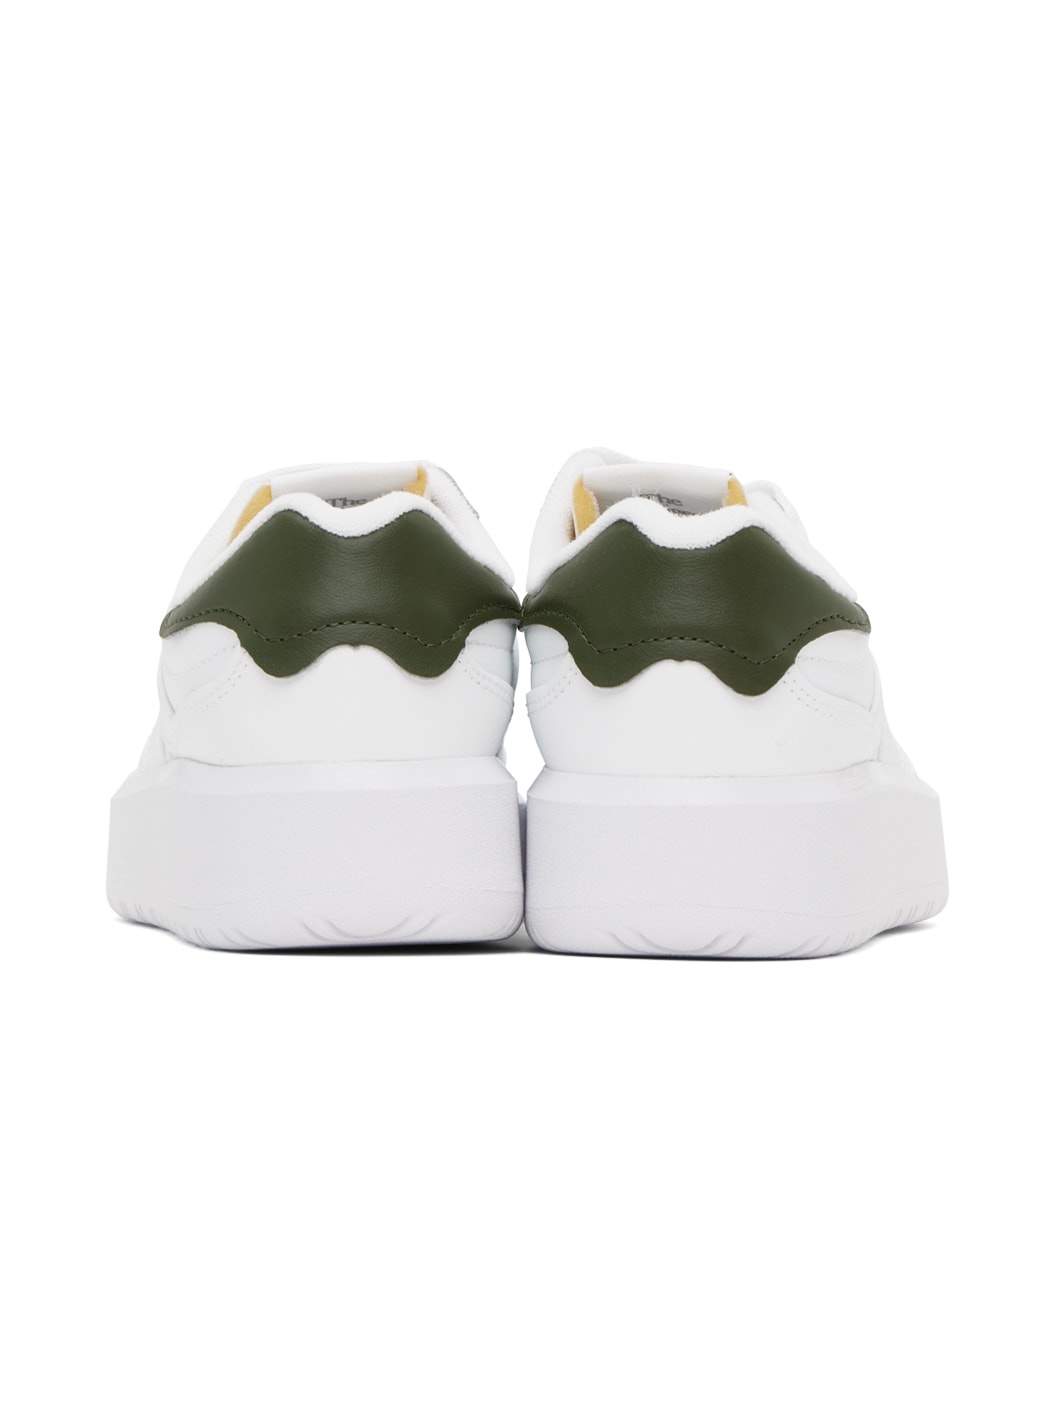 White & Green CT302 Sneakers - 2